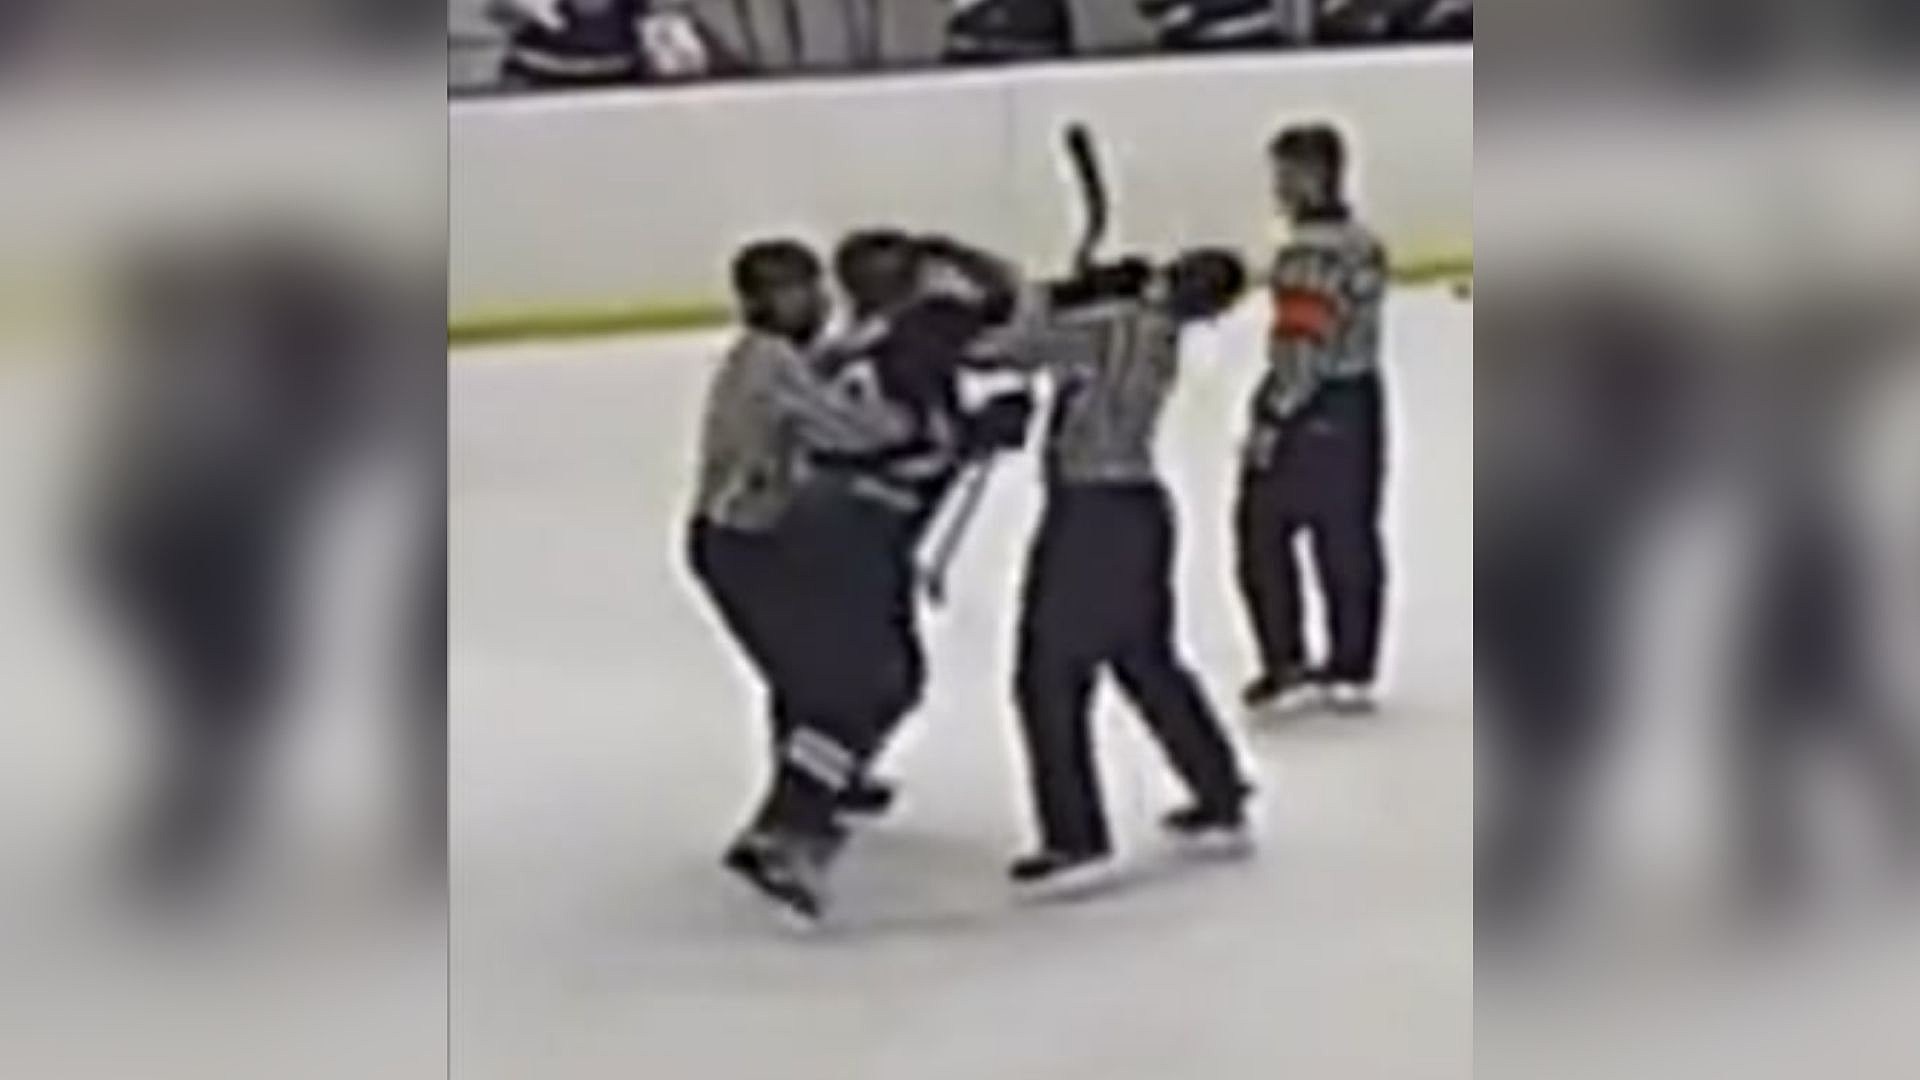 Junior Hockey Player Who Punched Referee Baned For Life, Police Investigating pic